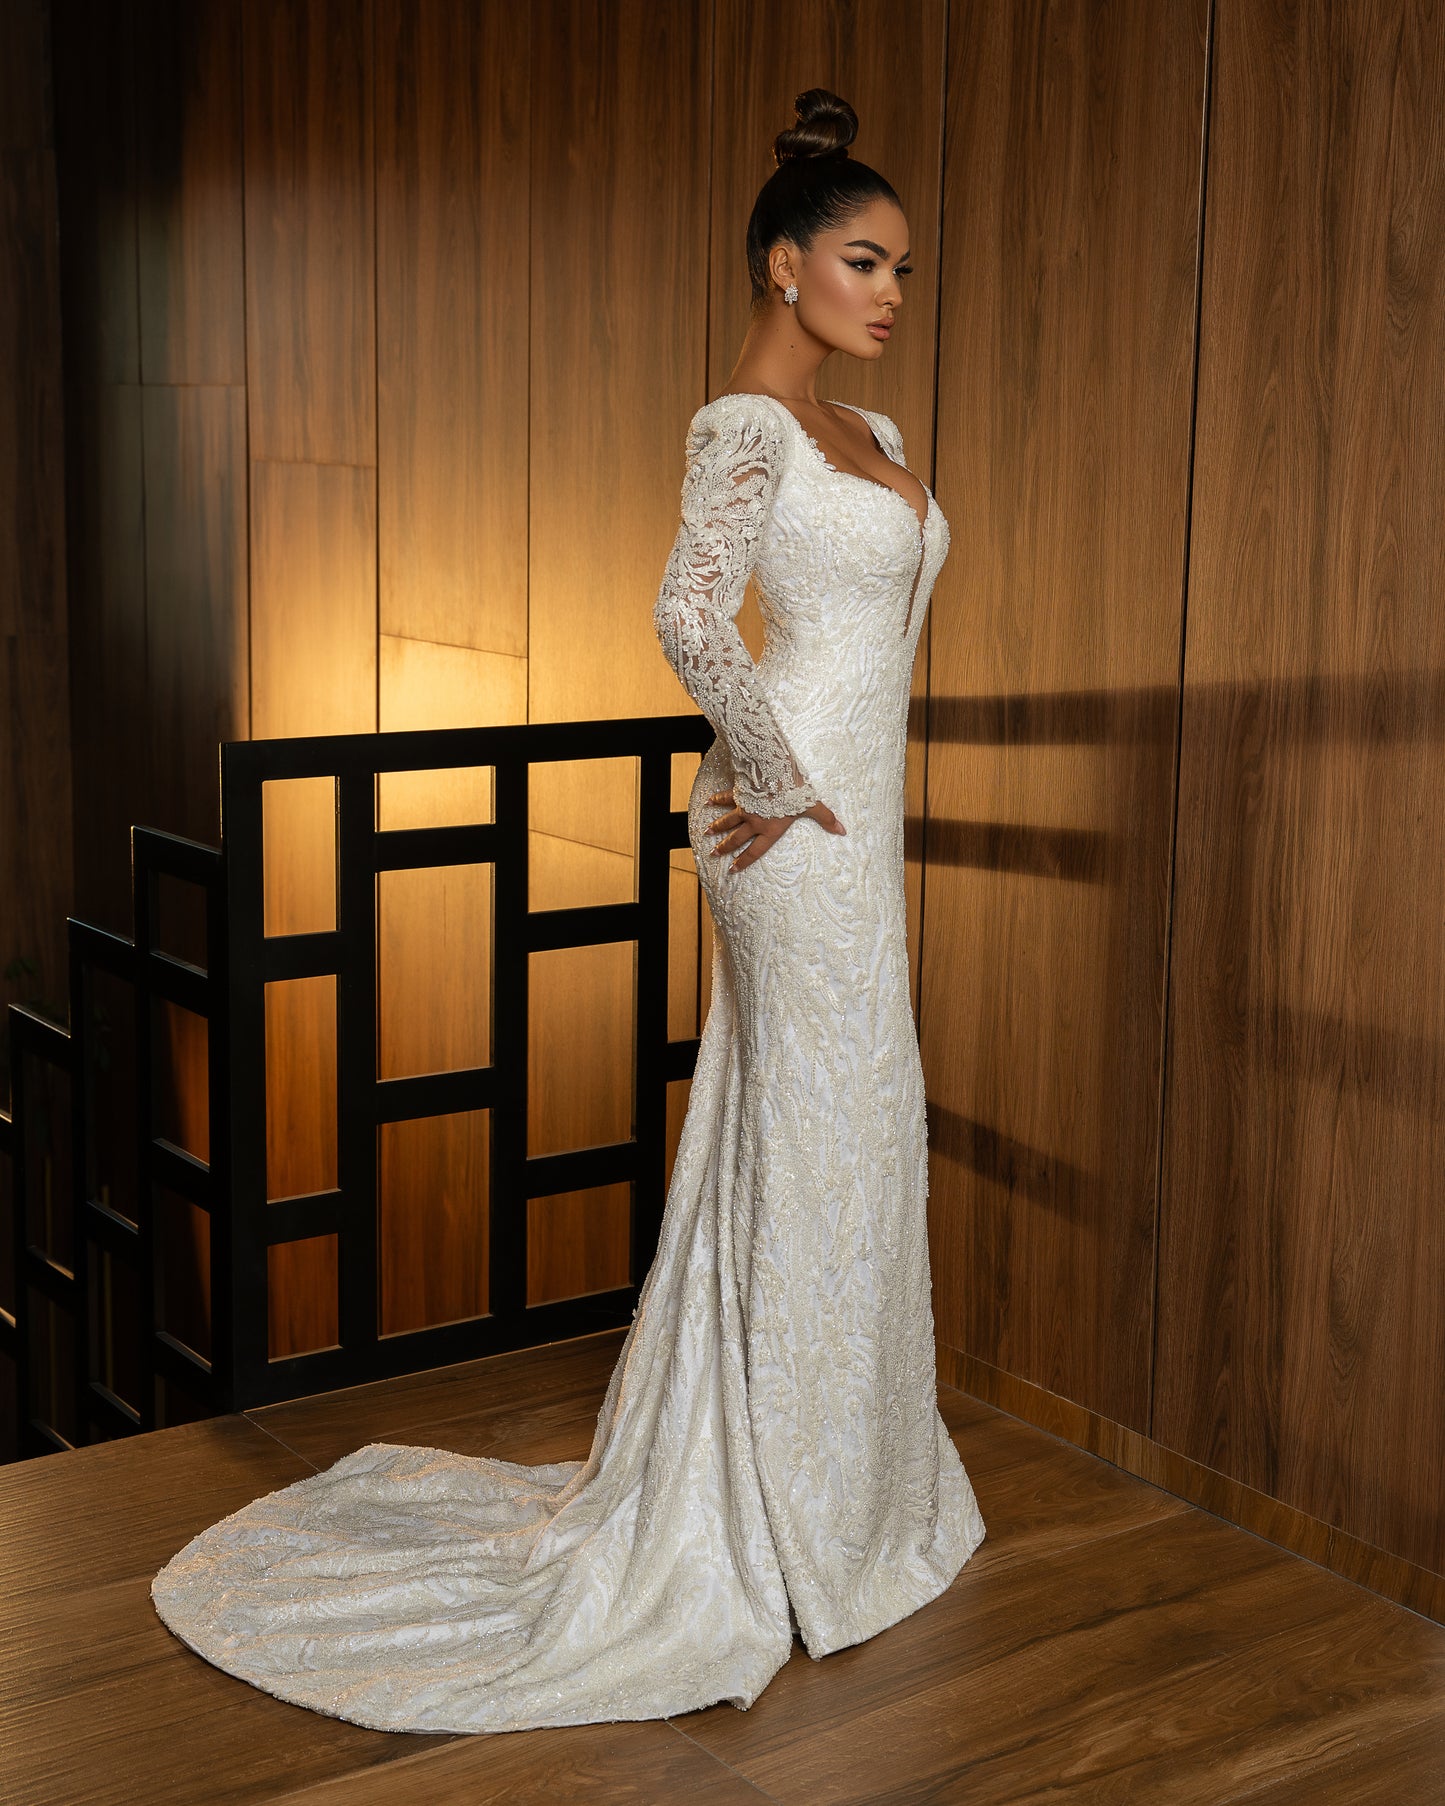 DRESS WITH LACE MATERIAL